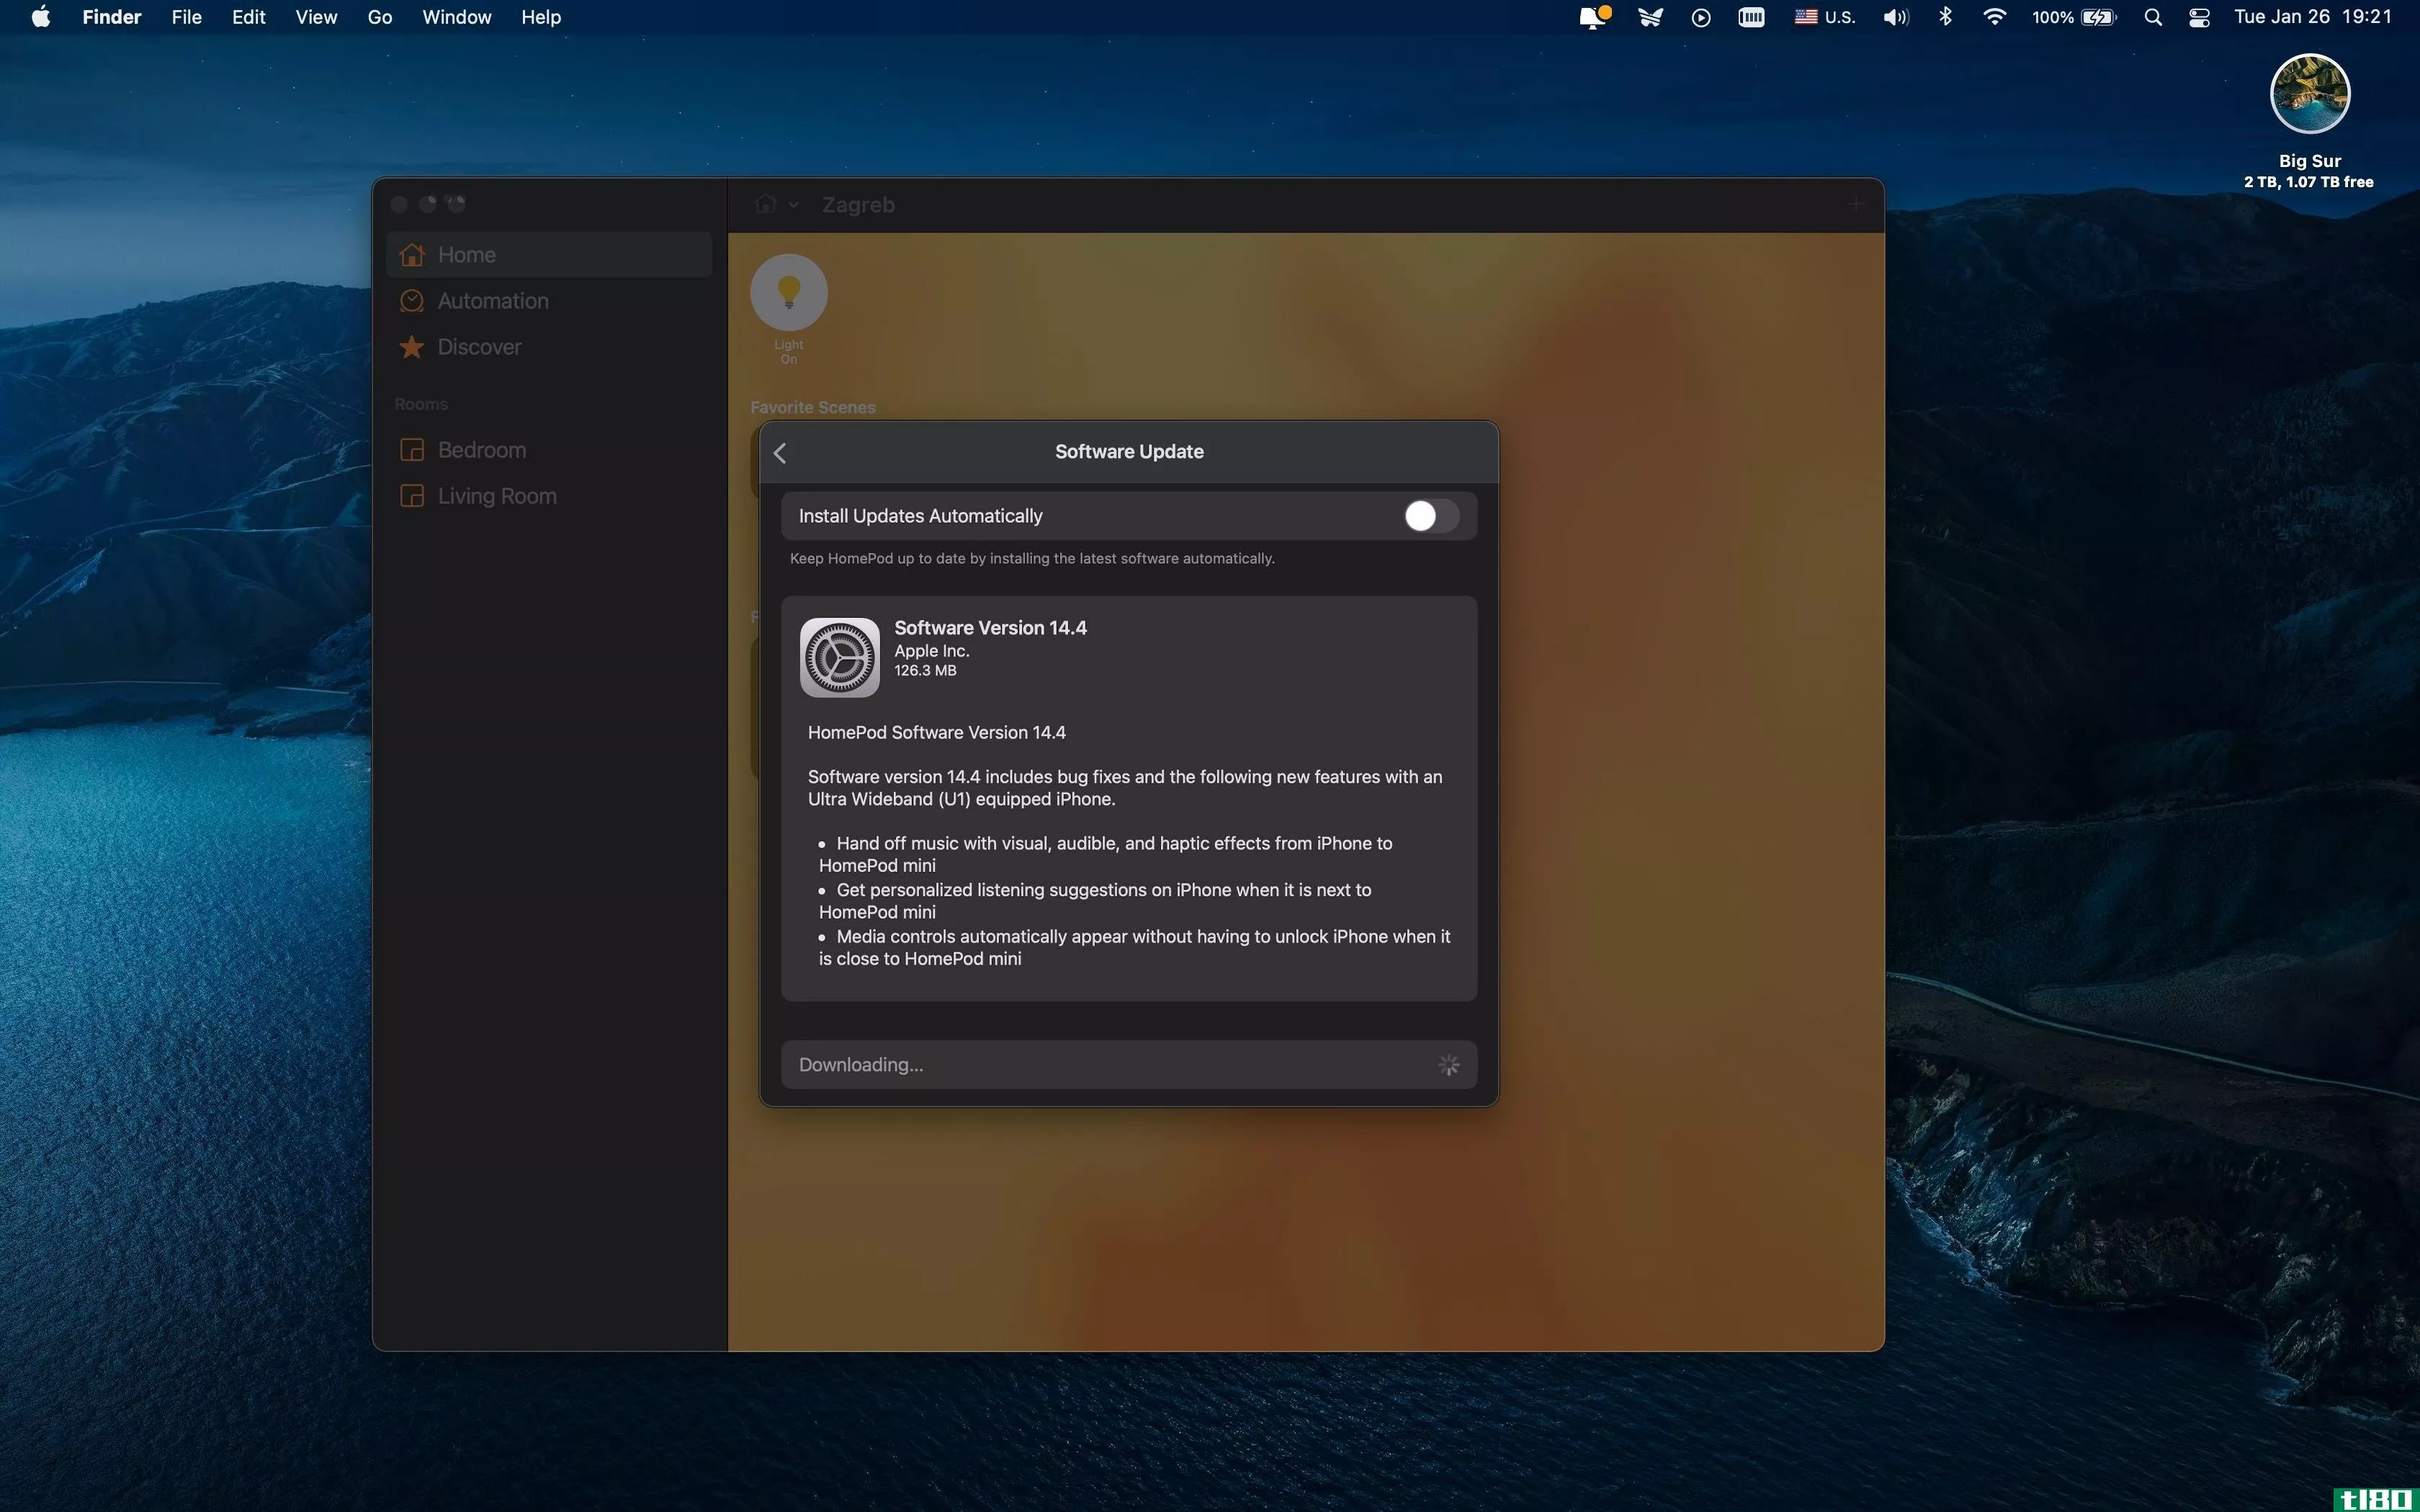 A Mac screenshot showing the Home app with the HomePod software 14.4 update prompt displayed